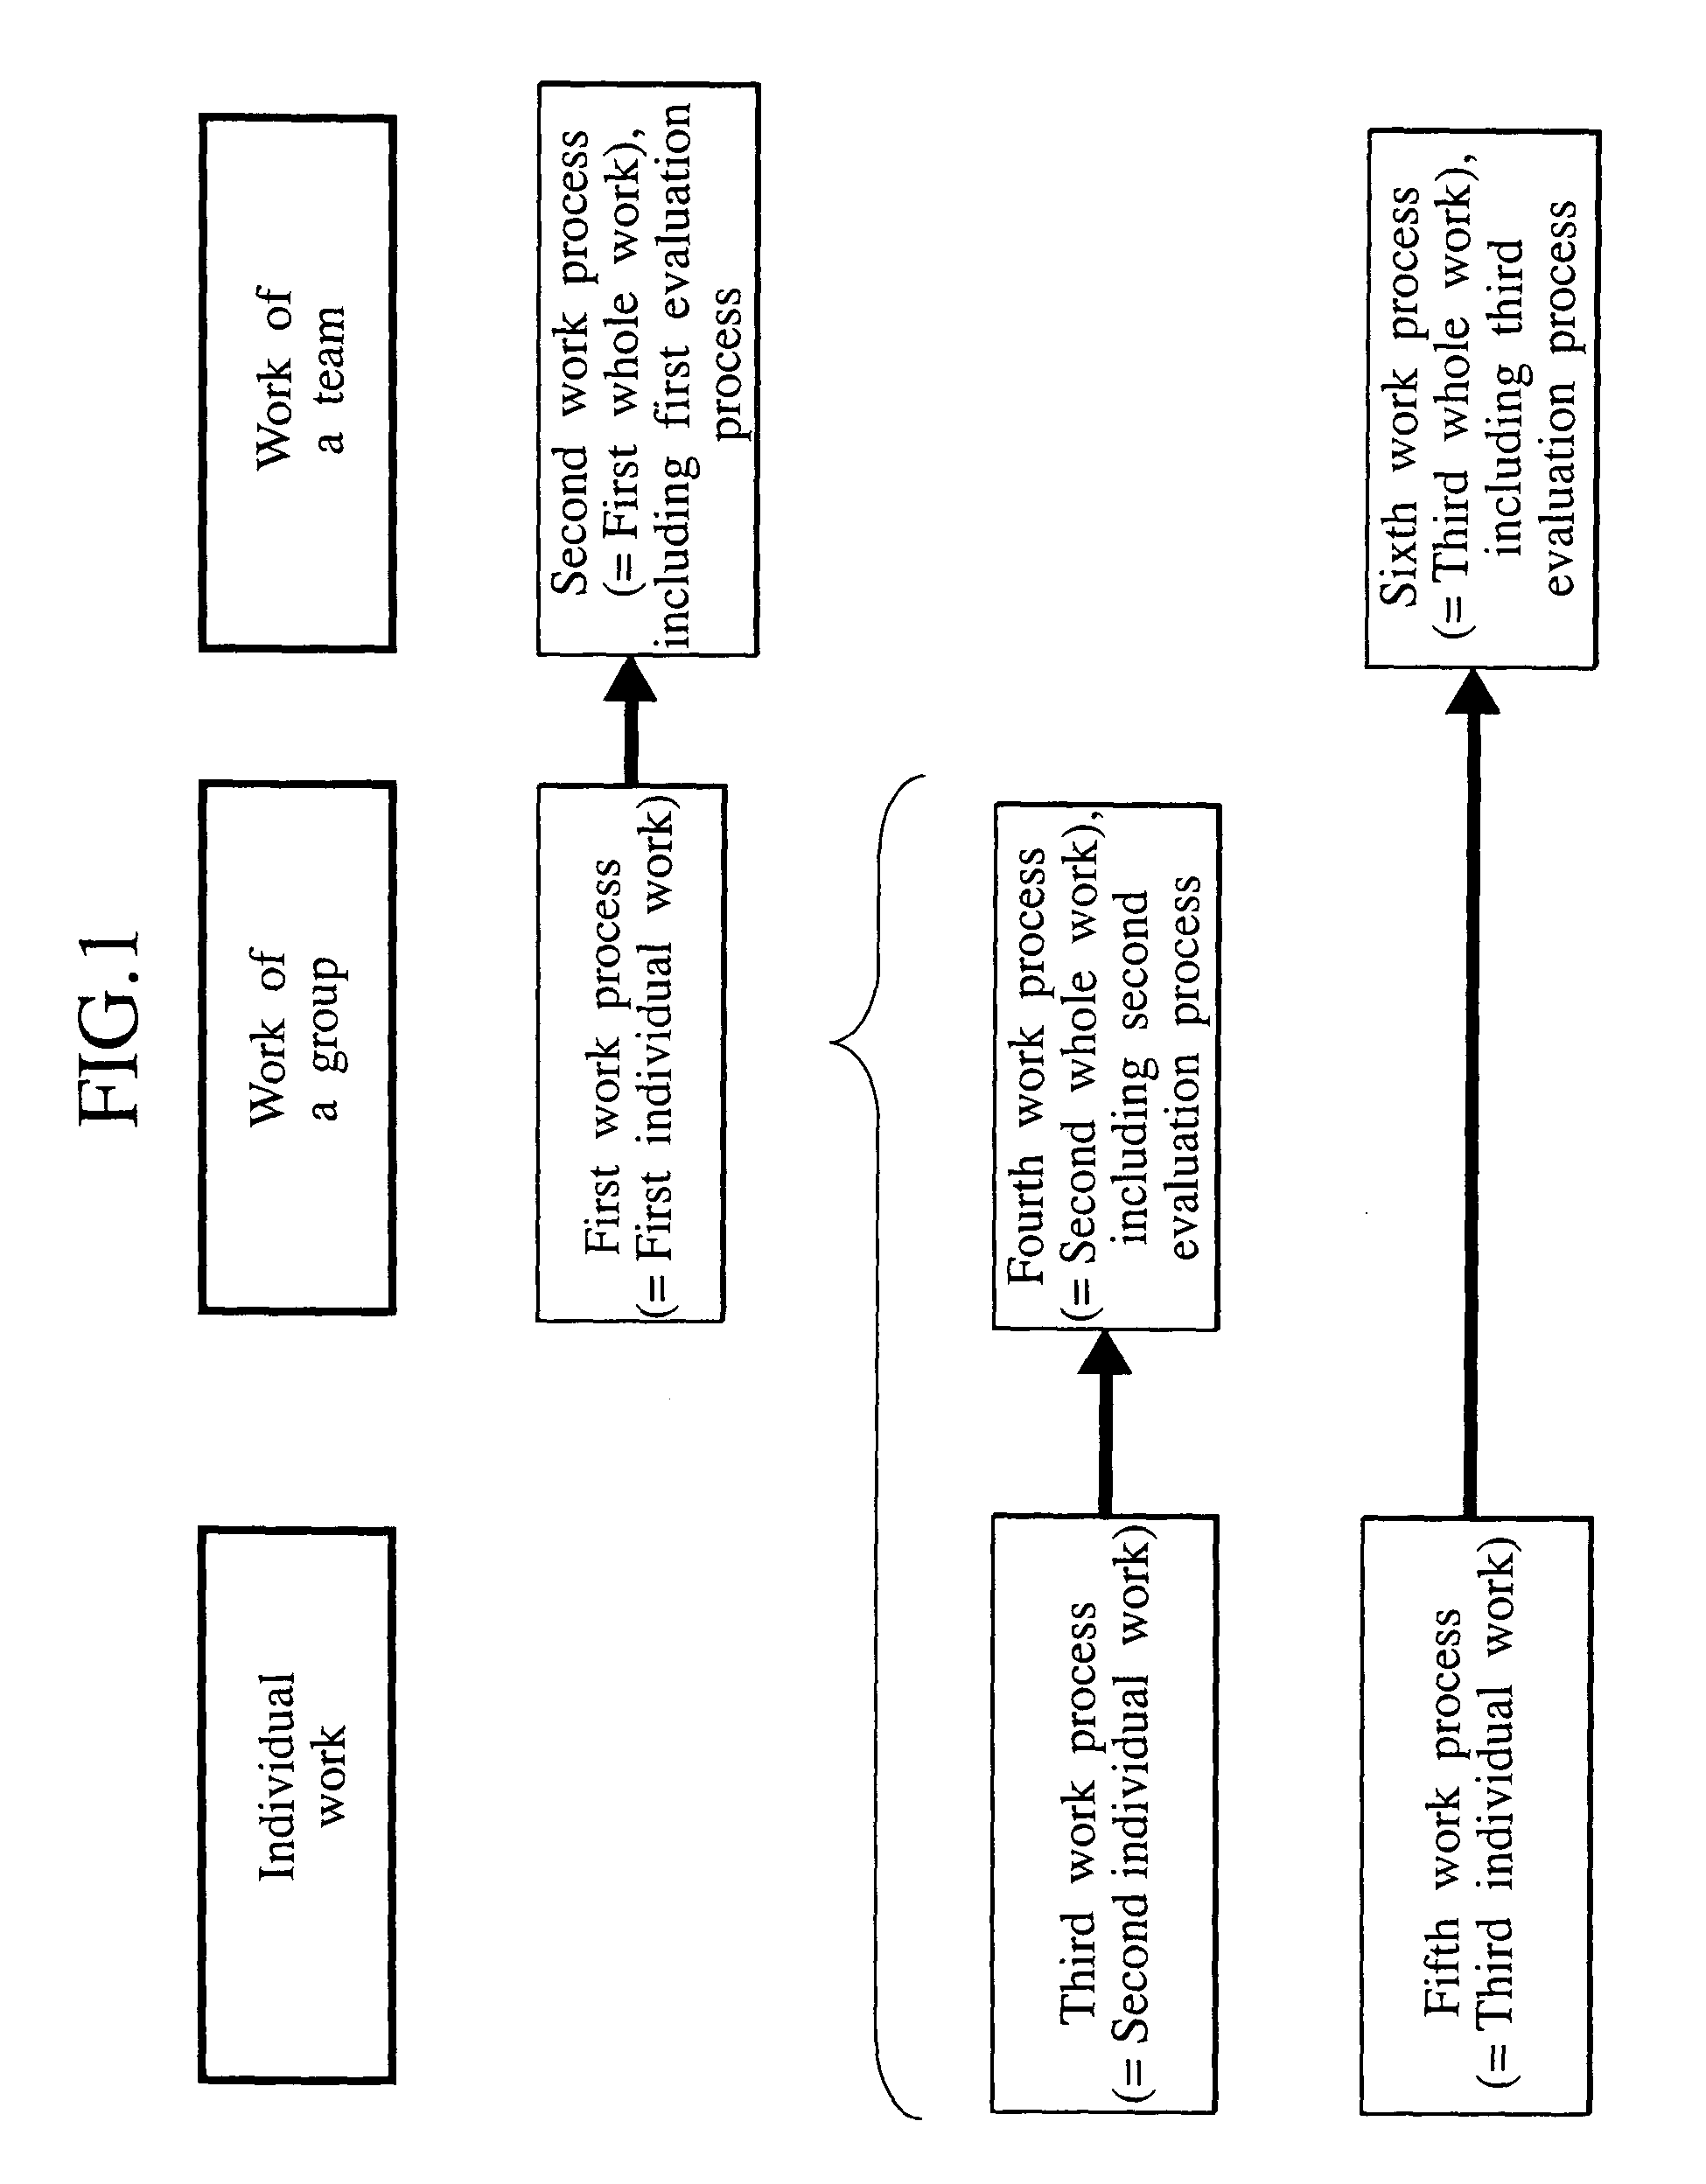 Information processing method and its supporting system, and tool used for them